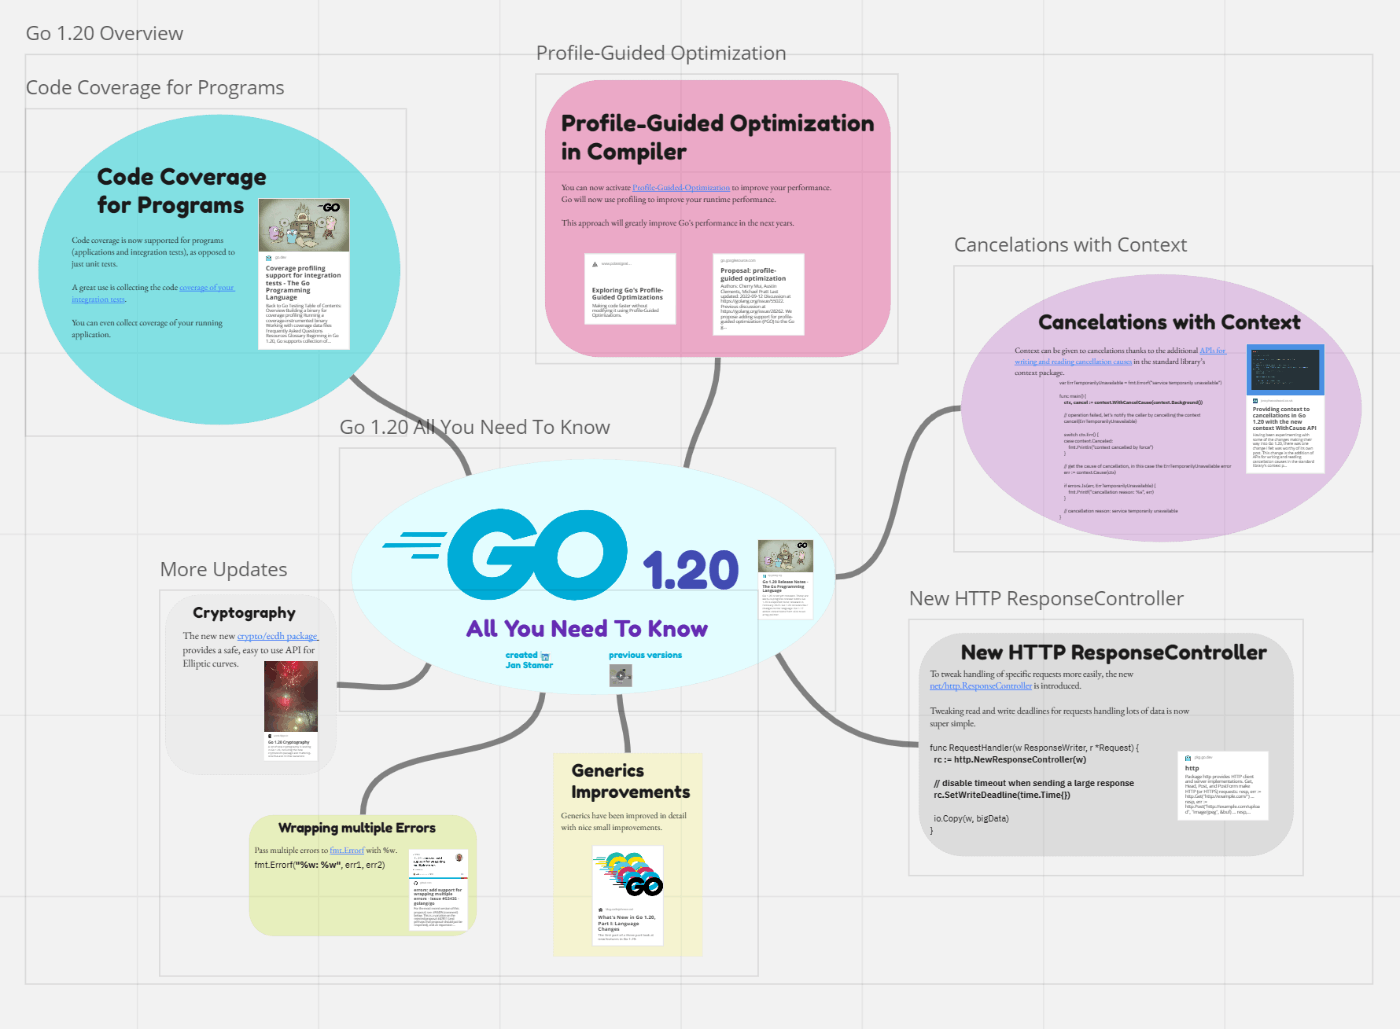 Go 1.20 All You Need to Know(https://miro.com/app/board/uXjVPyMixKs=/)